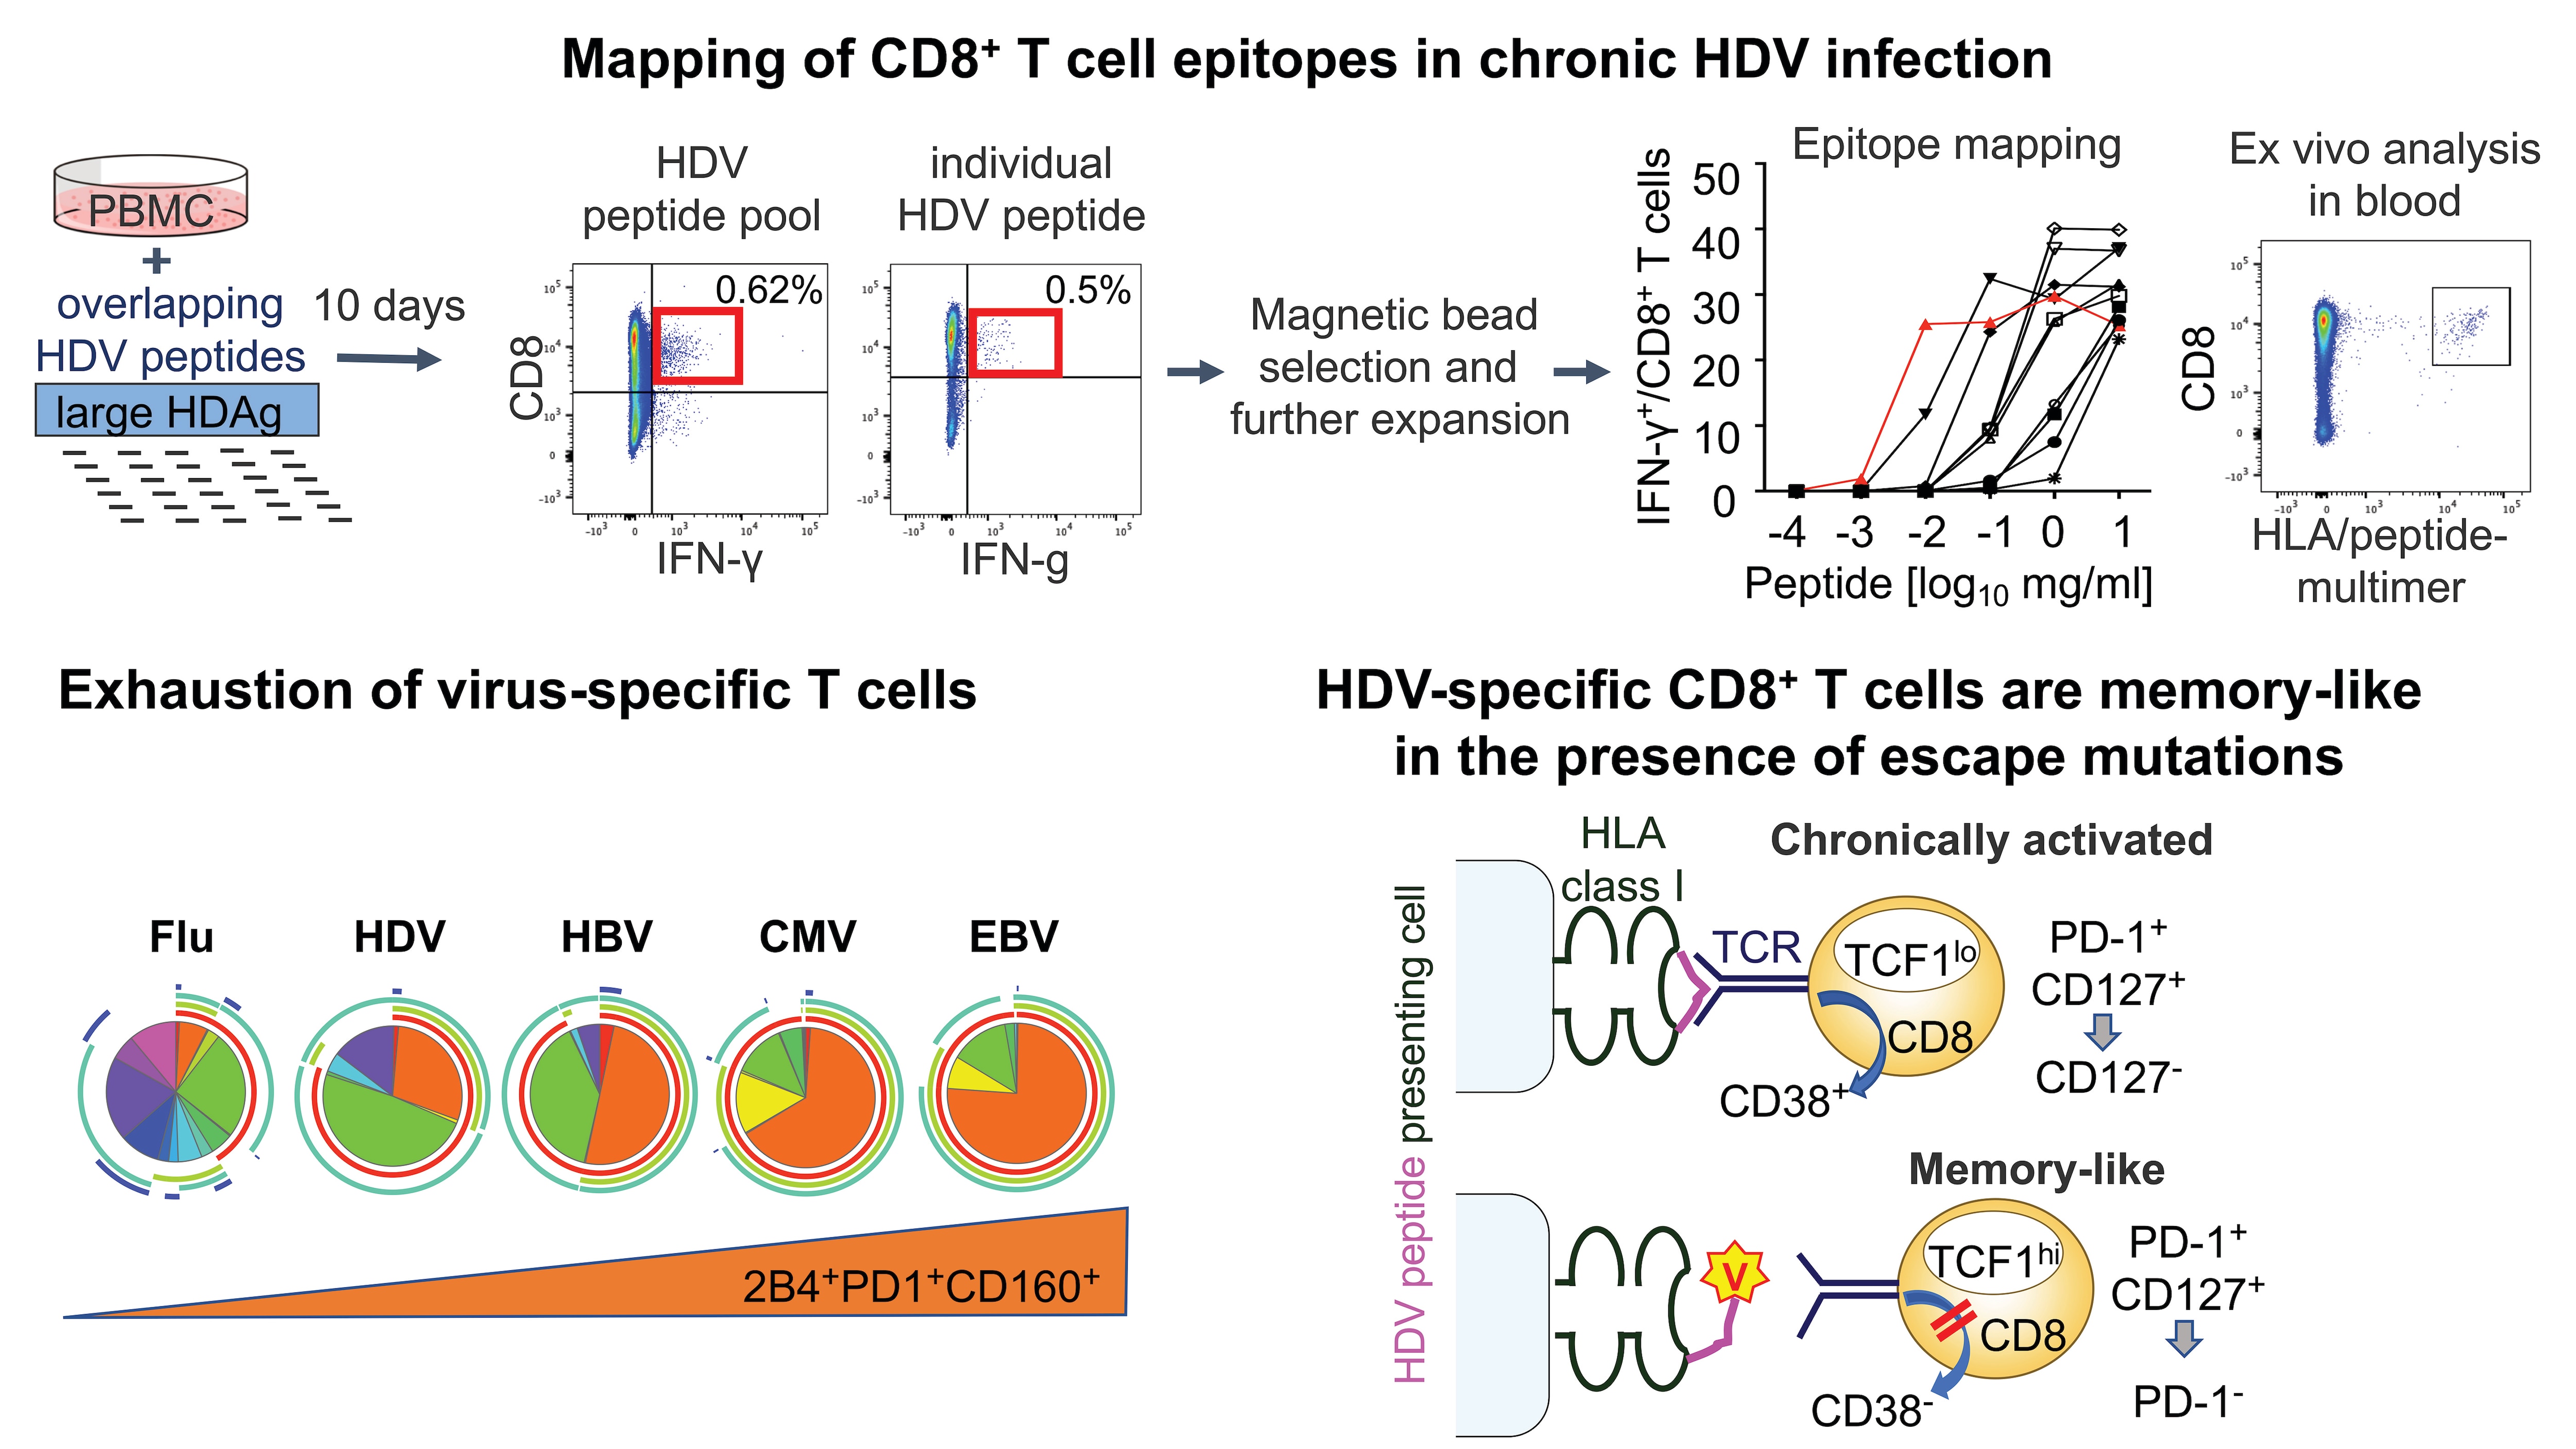 Diagram showing mapping of CD8+ T cell epitopes in chronic HDV infection, exhaustion of virus-specific T cells, and HDC-specific CD8+ T cells are memory-like in the presence of escape mutations.